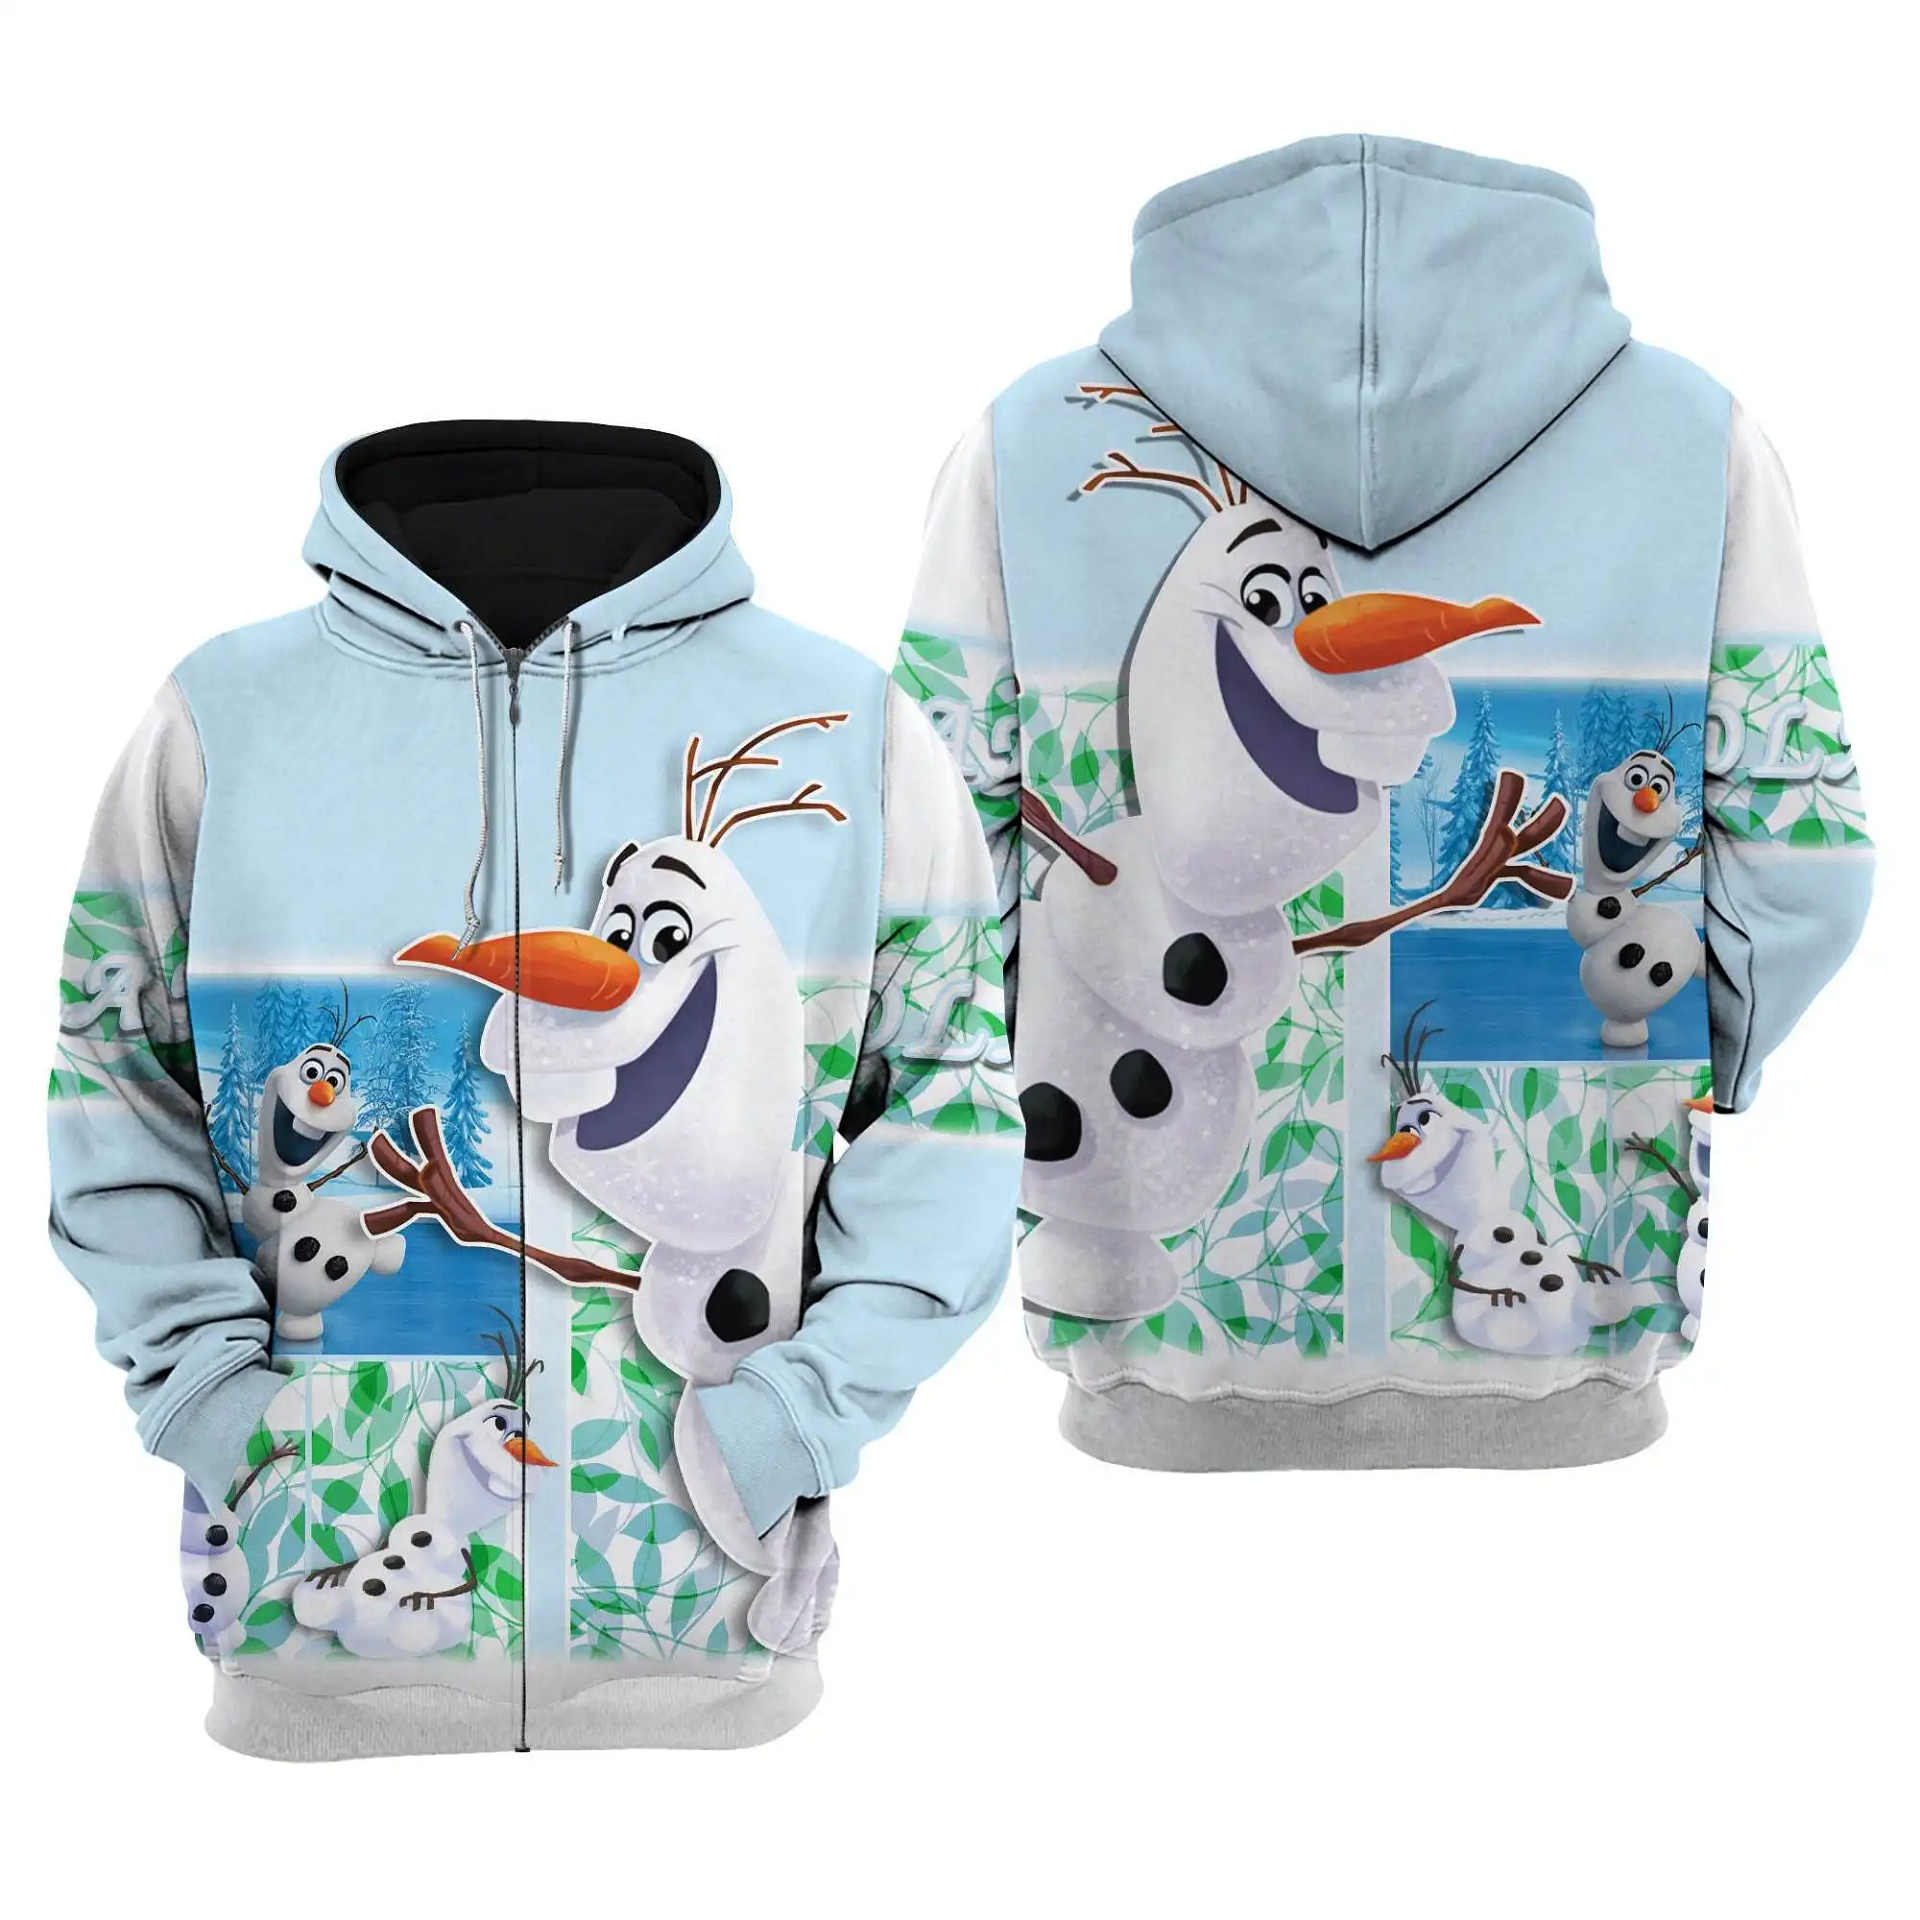 Olaf Frozen Disney Graphic Cartoon Outfits Clothing Men Women Kids Toddlers Hoodie 3D